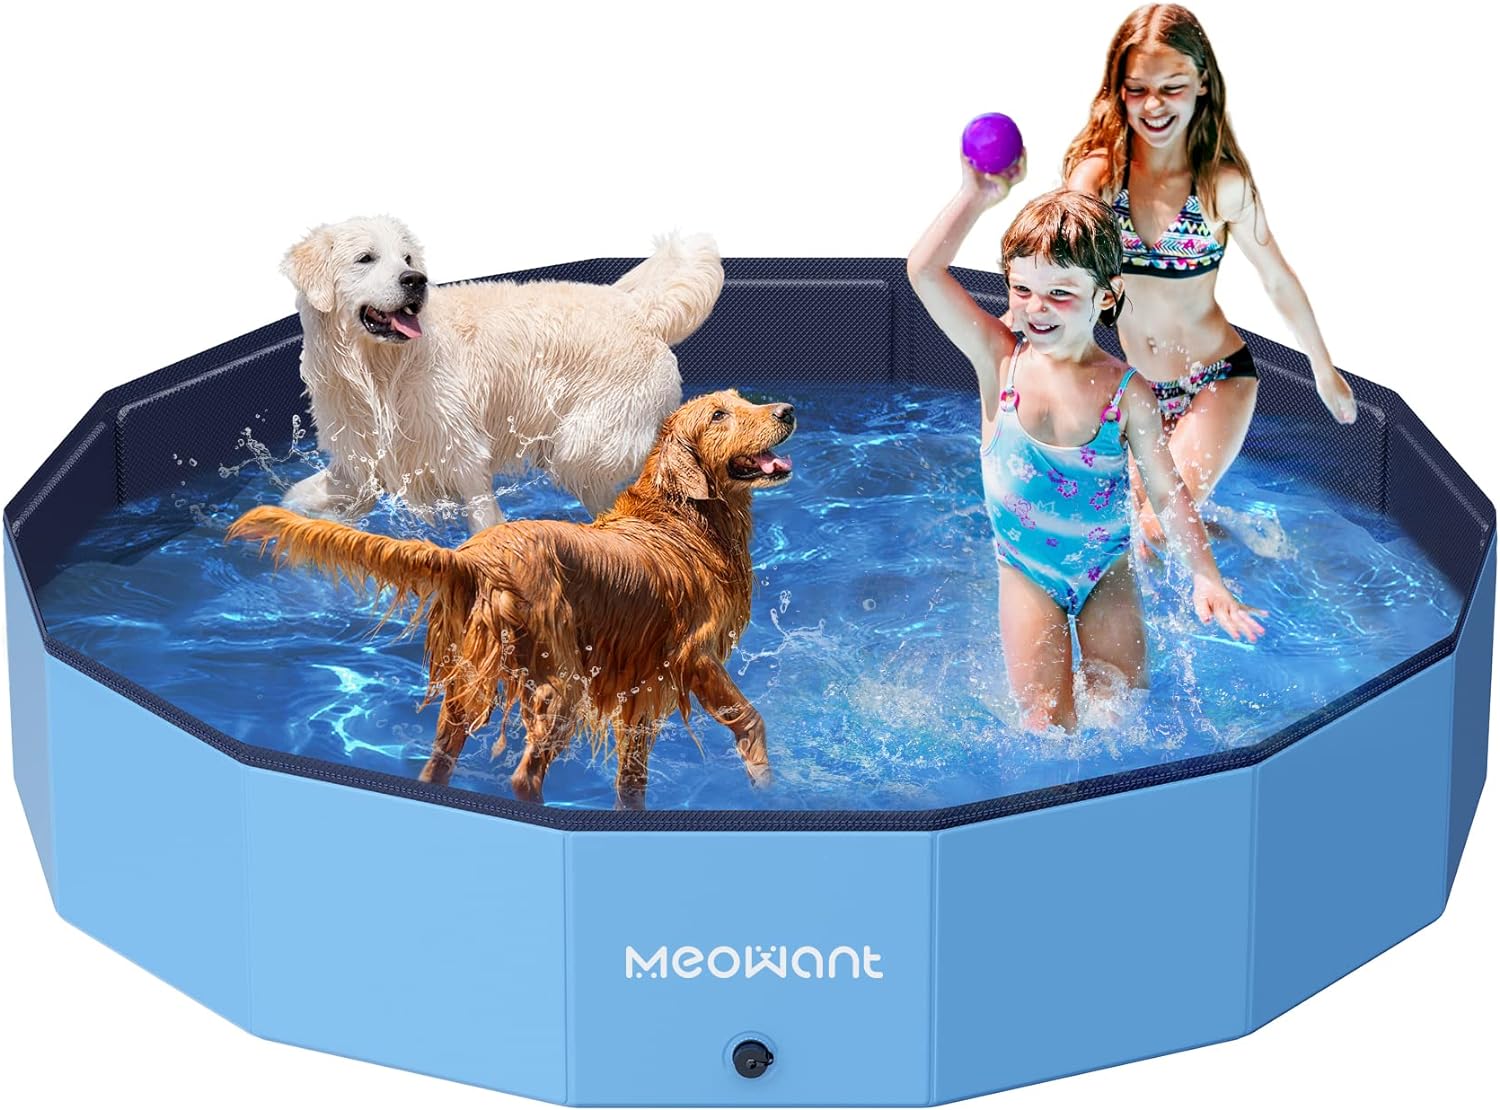 I run an in home dog daycare / boarding business and come spring and summer, the temps get pretty hot here in northern Cali, so pools are a must! I do wish the flooring was more durable. Even over 2 thick tarps, I find myself patching minor holes every few weeks, but, I guess thats not too bad considering the amount of use these pools get. Floor and sides do hold up much better than other comparable pools. I have not folded up, stored and reused. Come the end of the season I toss them. So many 